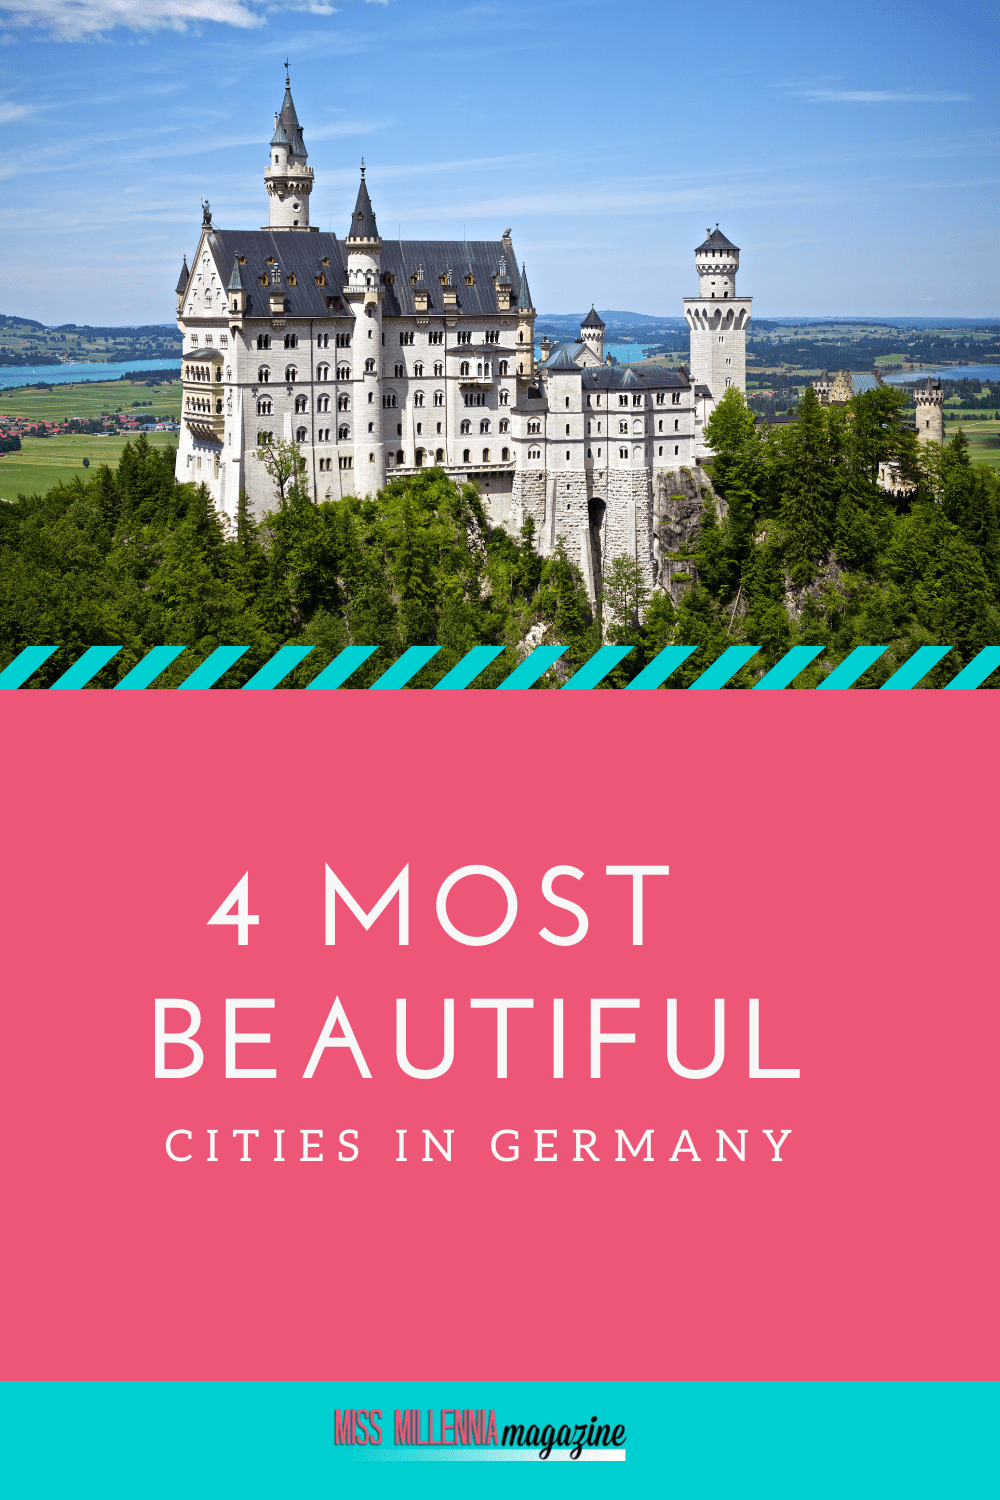 4 Most Beautiful Cities in Germany